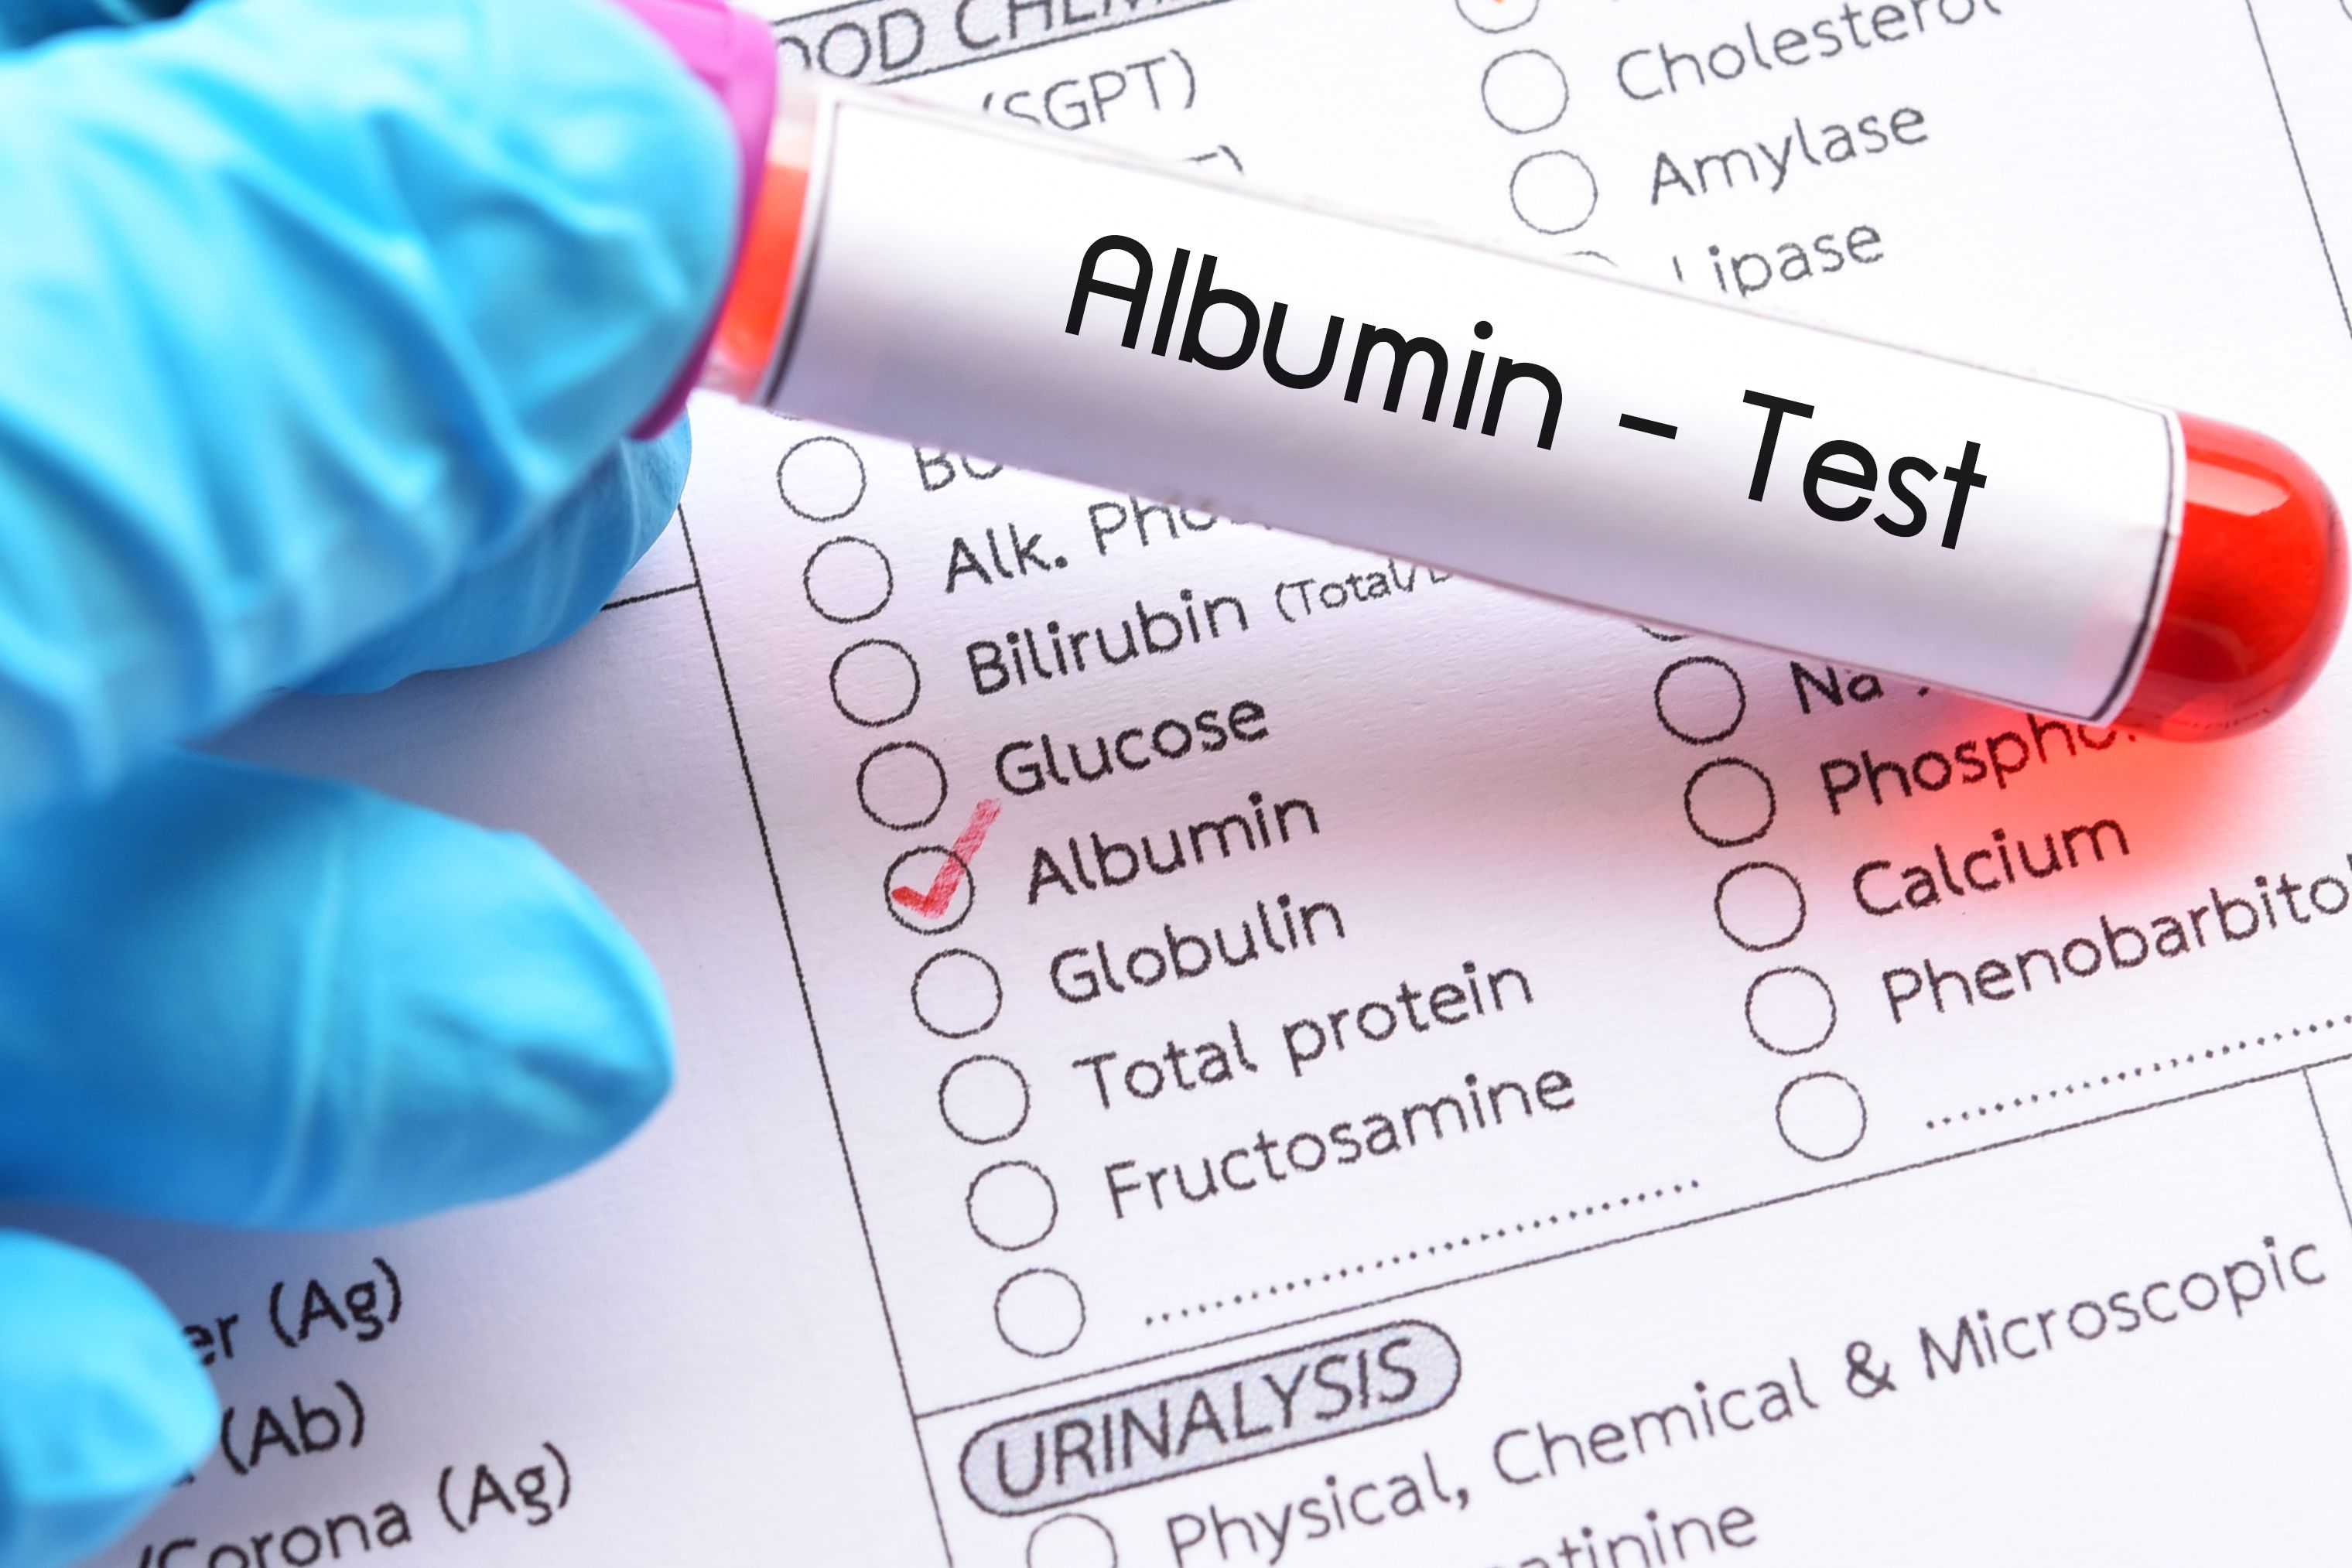 Albumin is the most abundant protein in the blood | image credit: jarun011 - stock.adobe.com